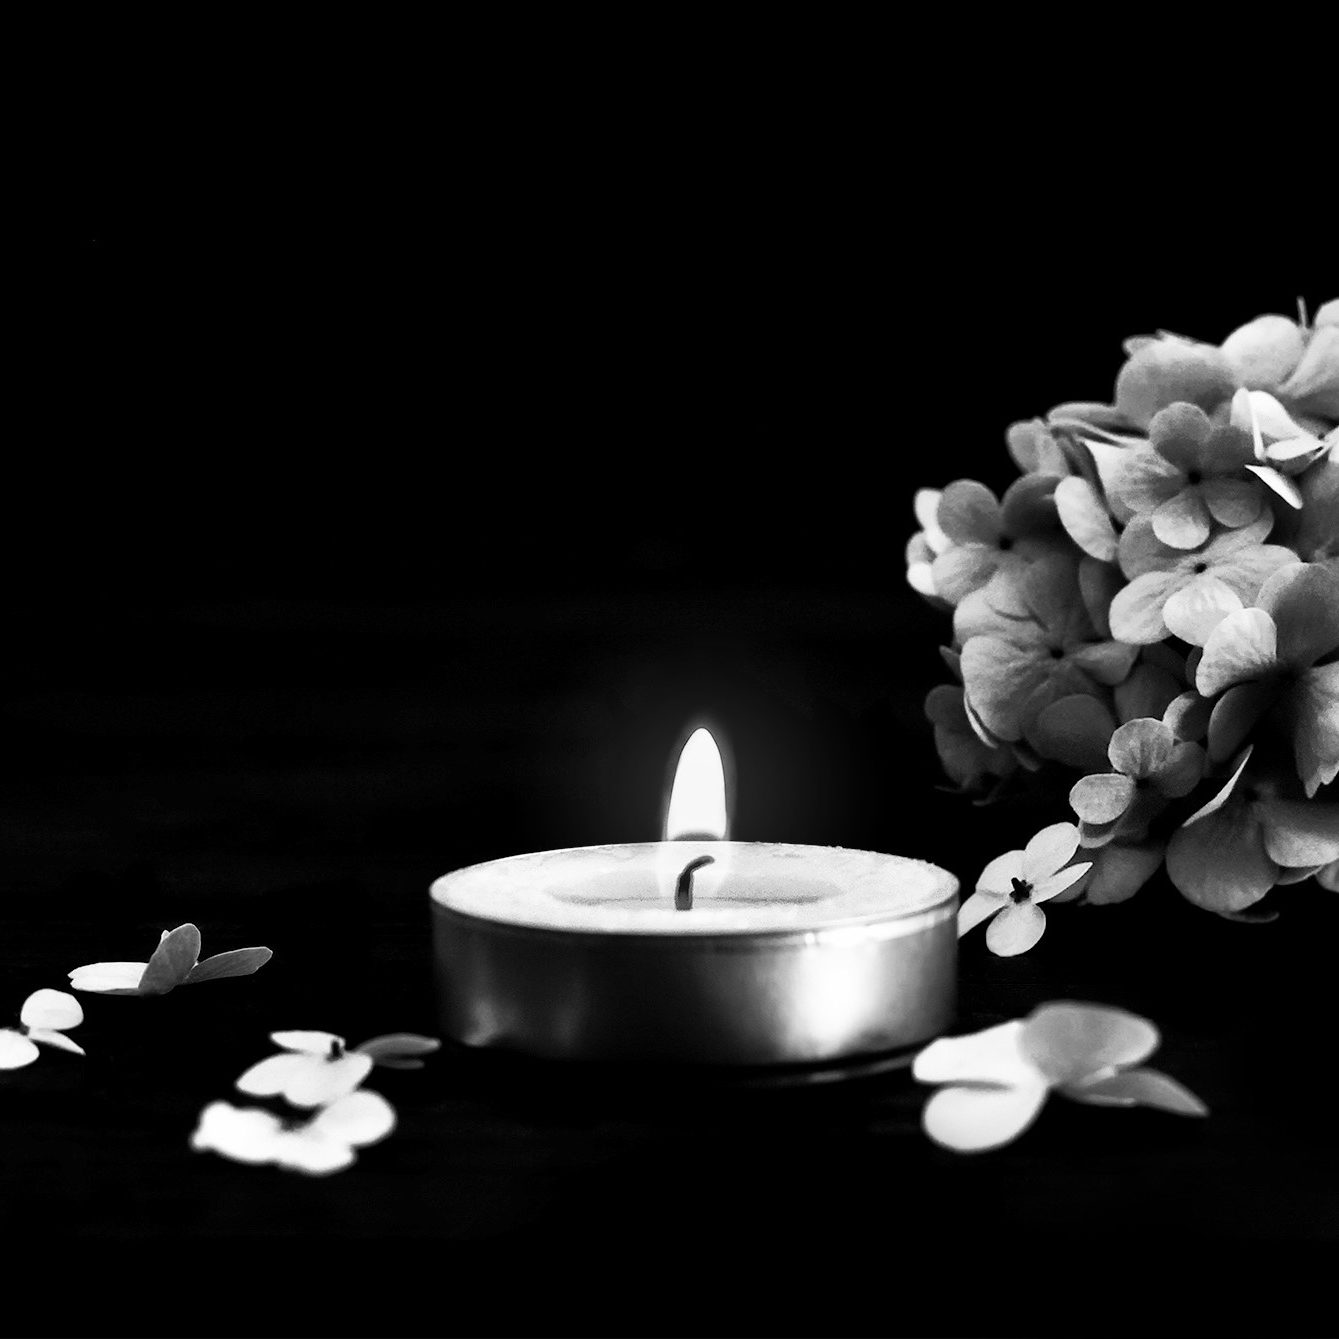 A tea candle light and flowers in grayscale against a black backdrop